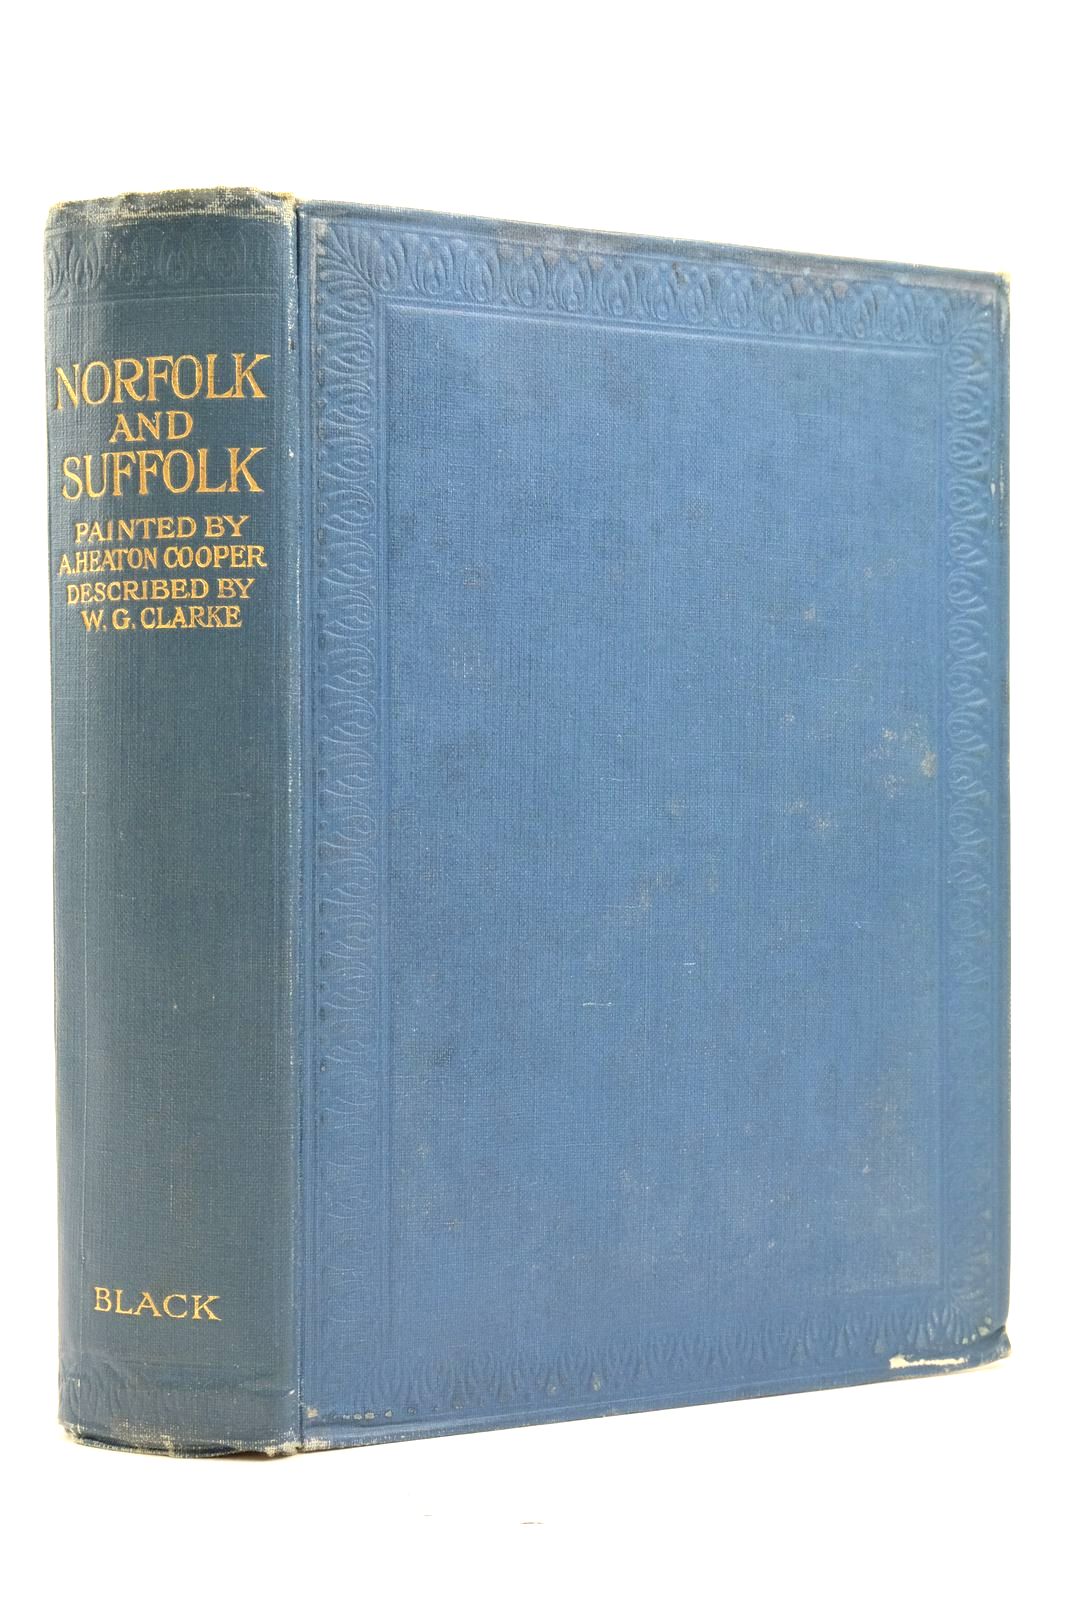 Photo of NORFOLK & SUFFOLK- Stock Number: 2137334